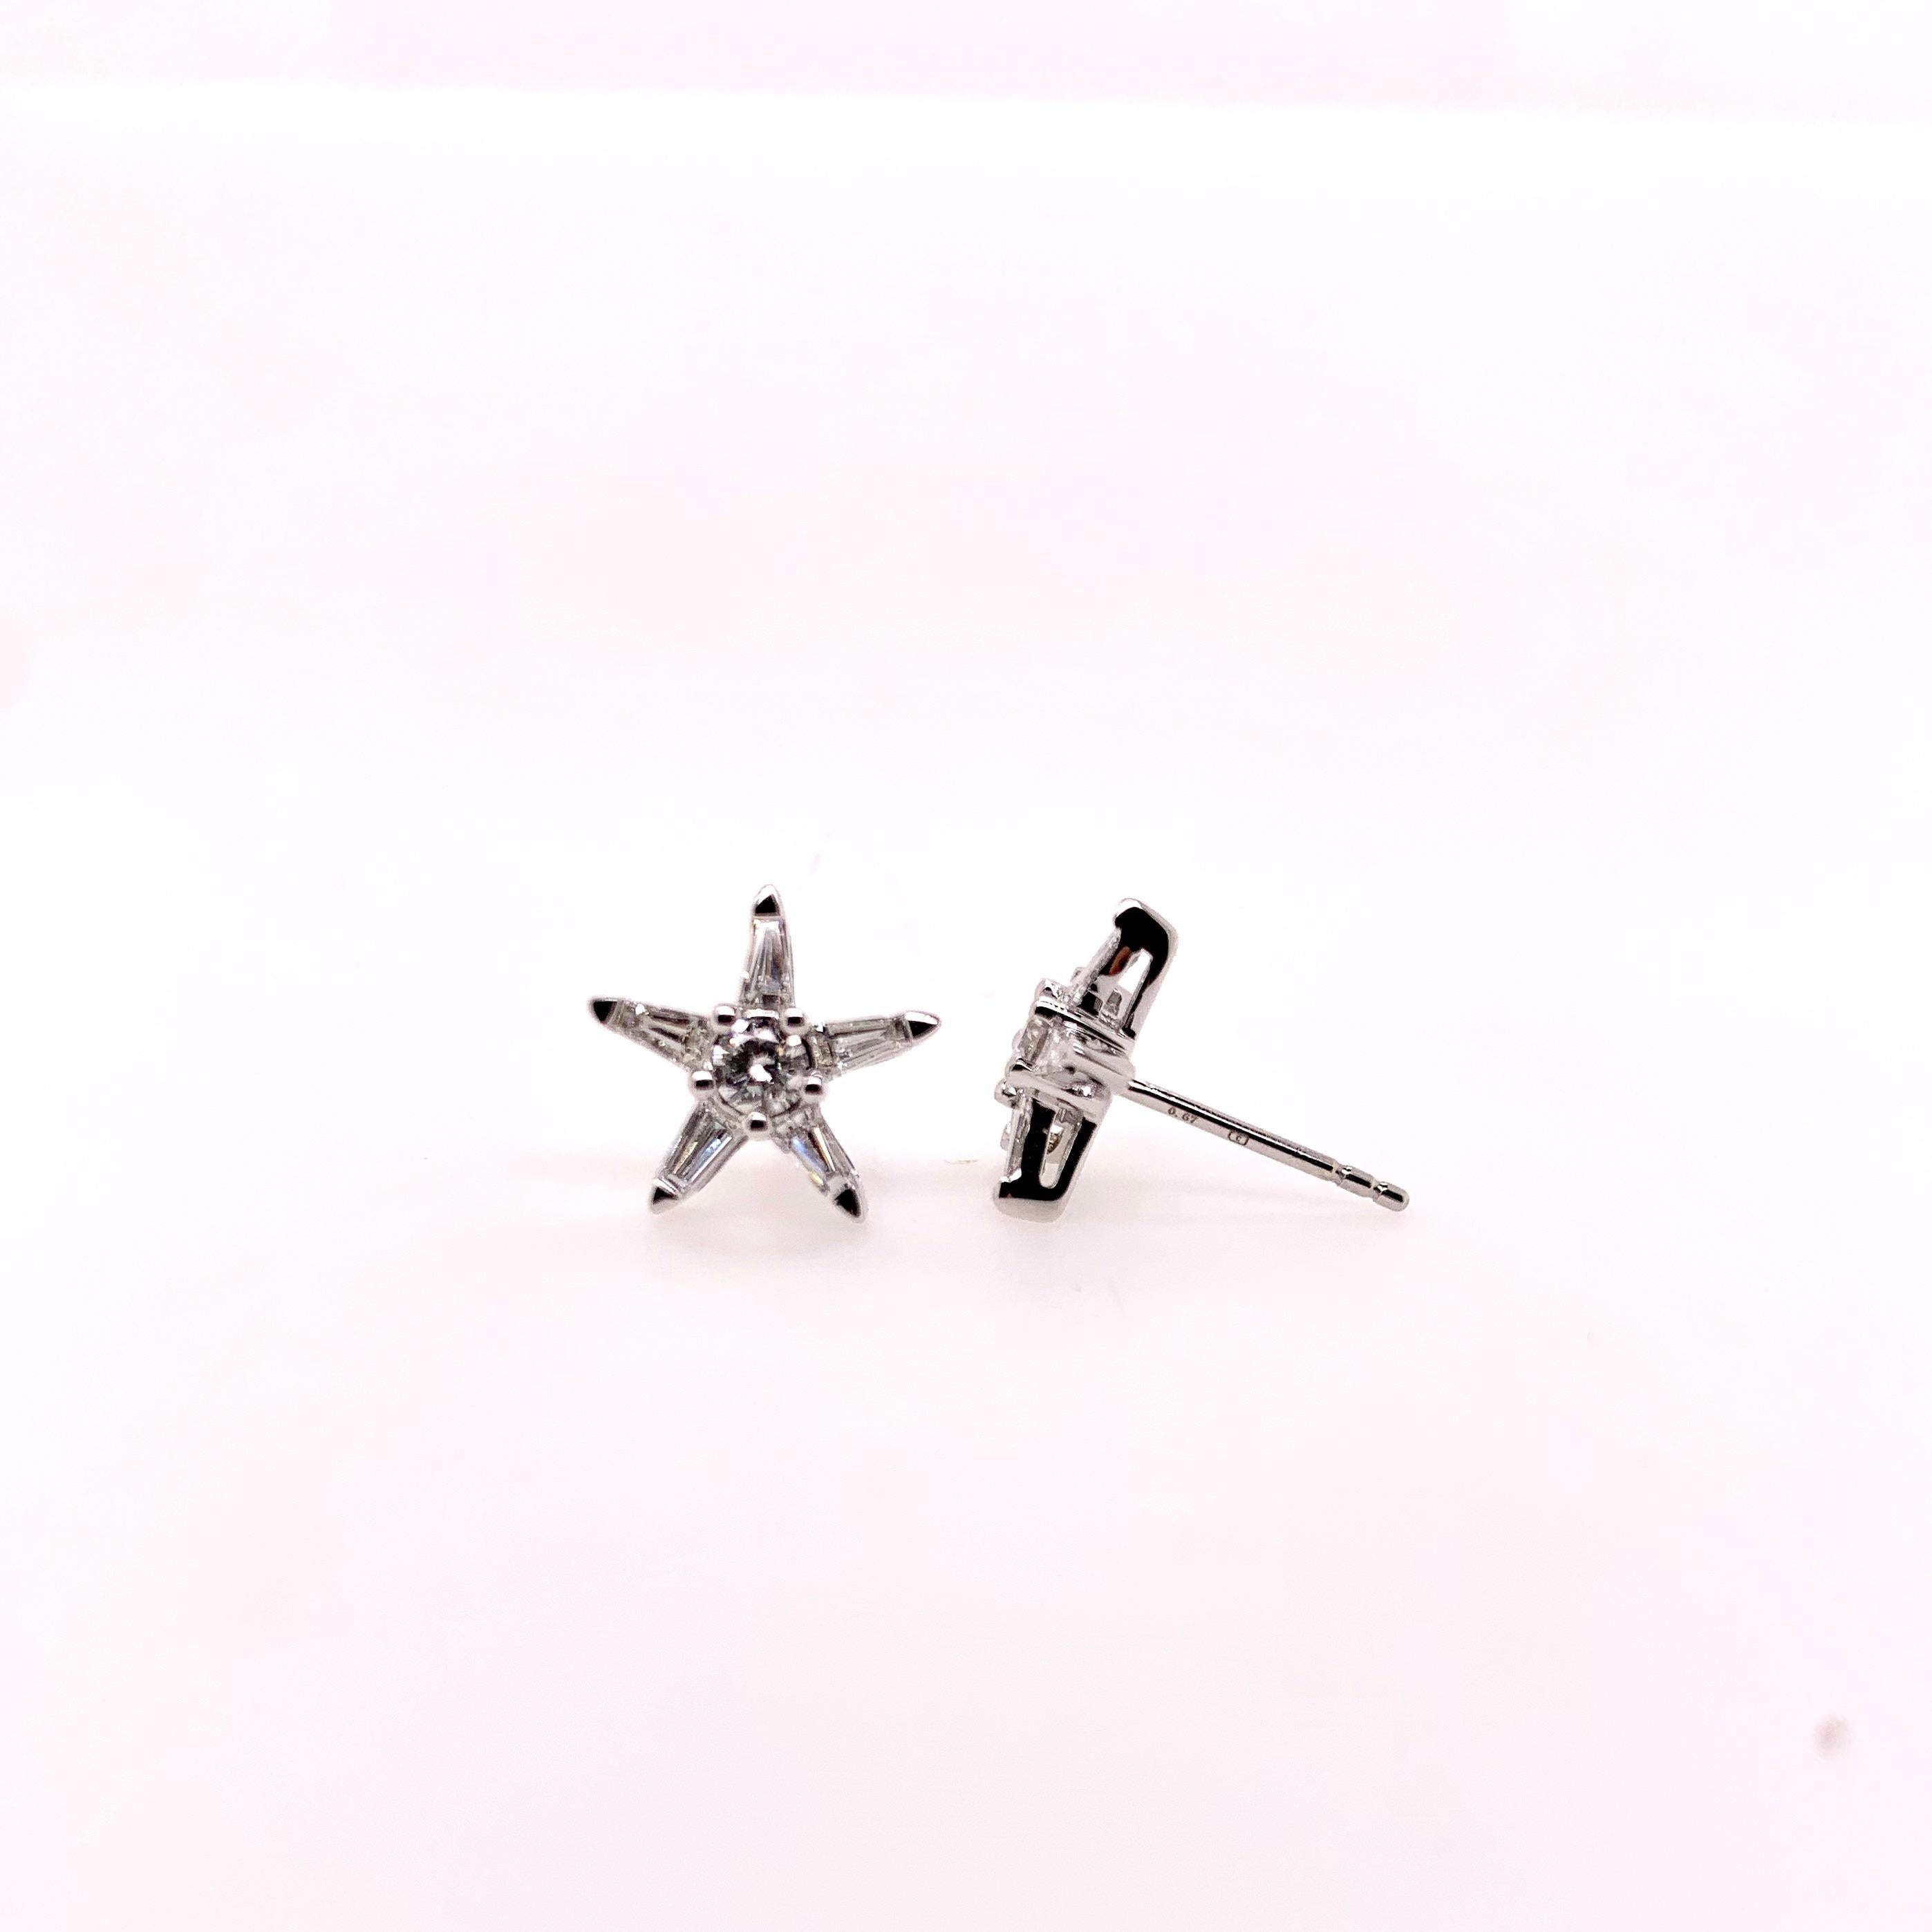 A whimsical pair of diamond star shaped earring studs!   Easy to wear with any outfit and will garnish attention!   Set in 18k white gold, the tapered baguettes form the pointed star and the round brilliant in the center as the focal